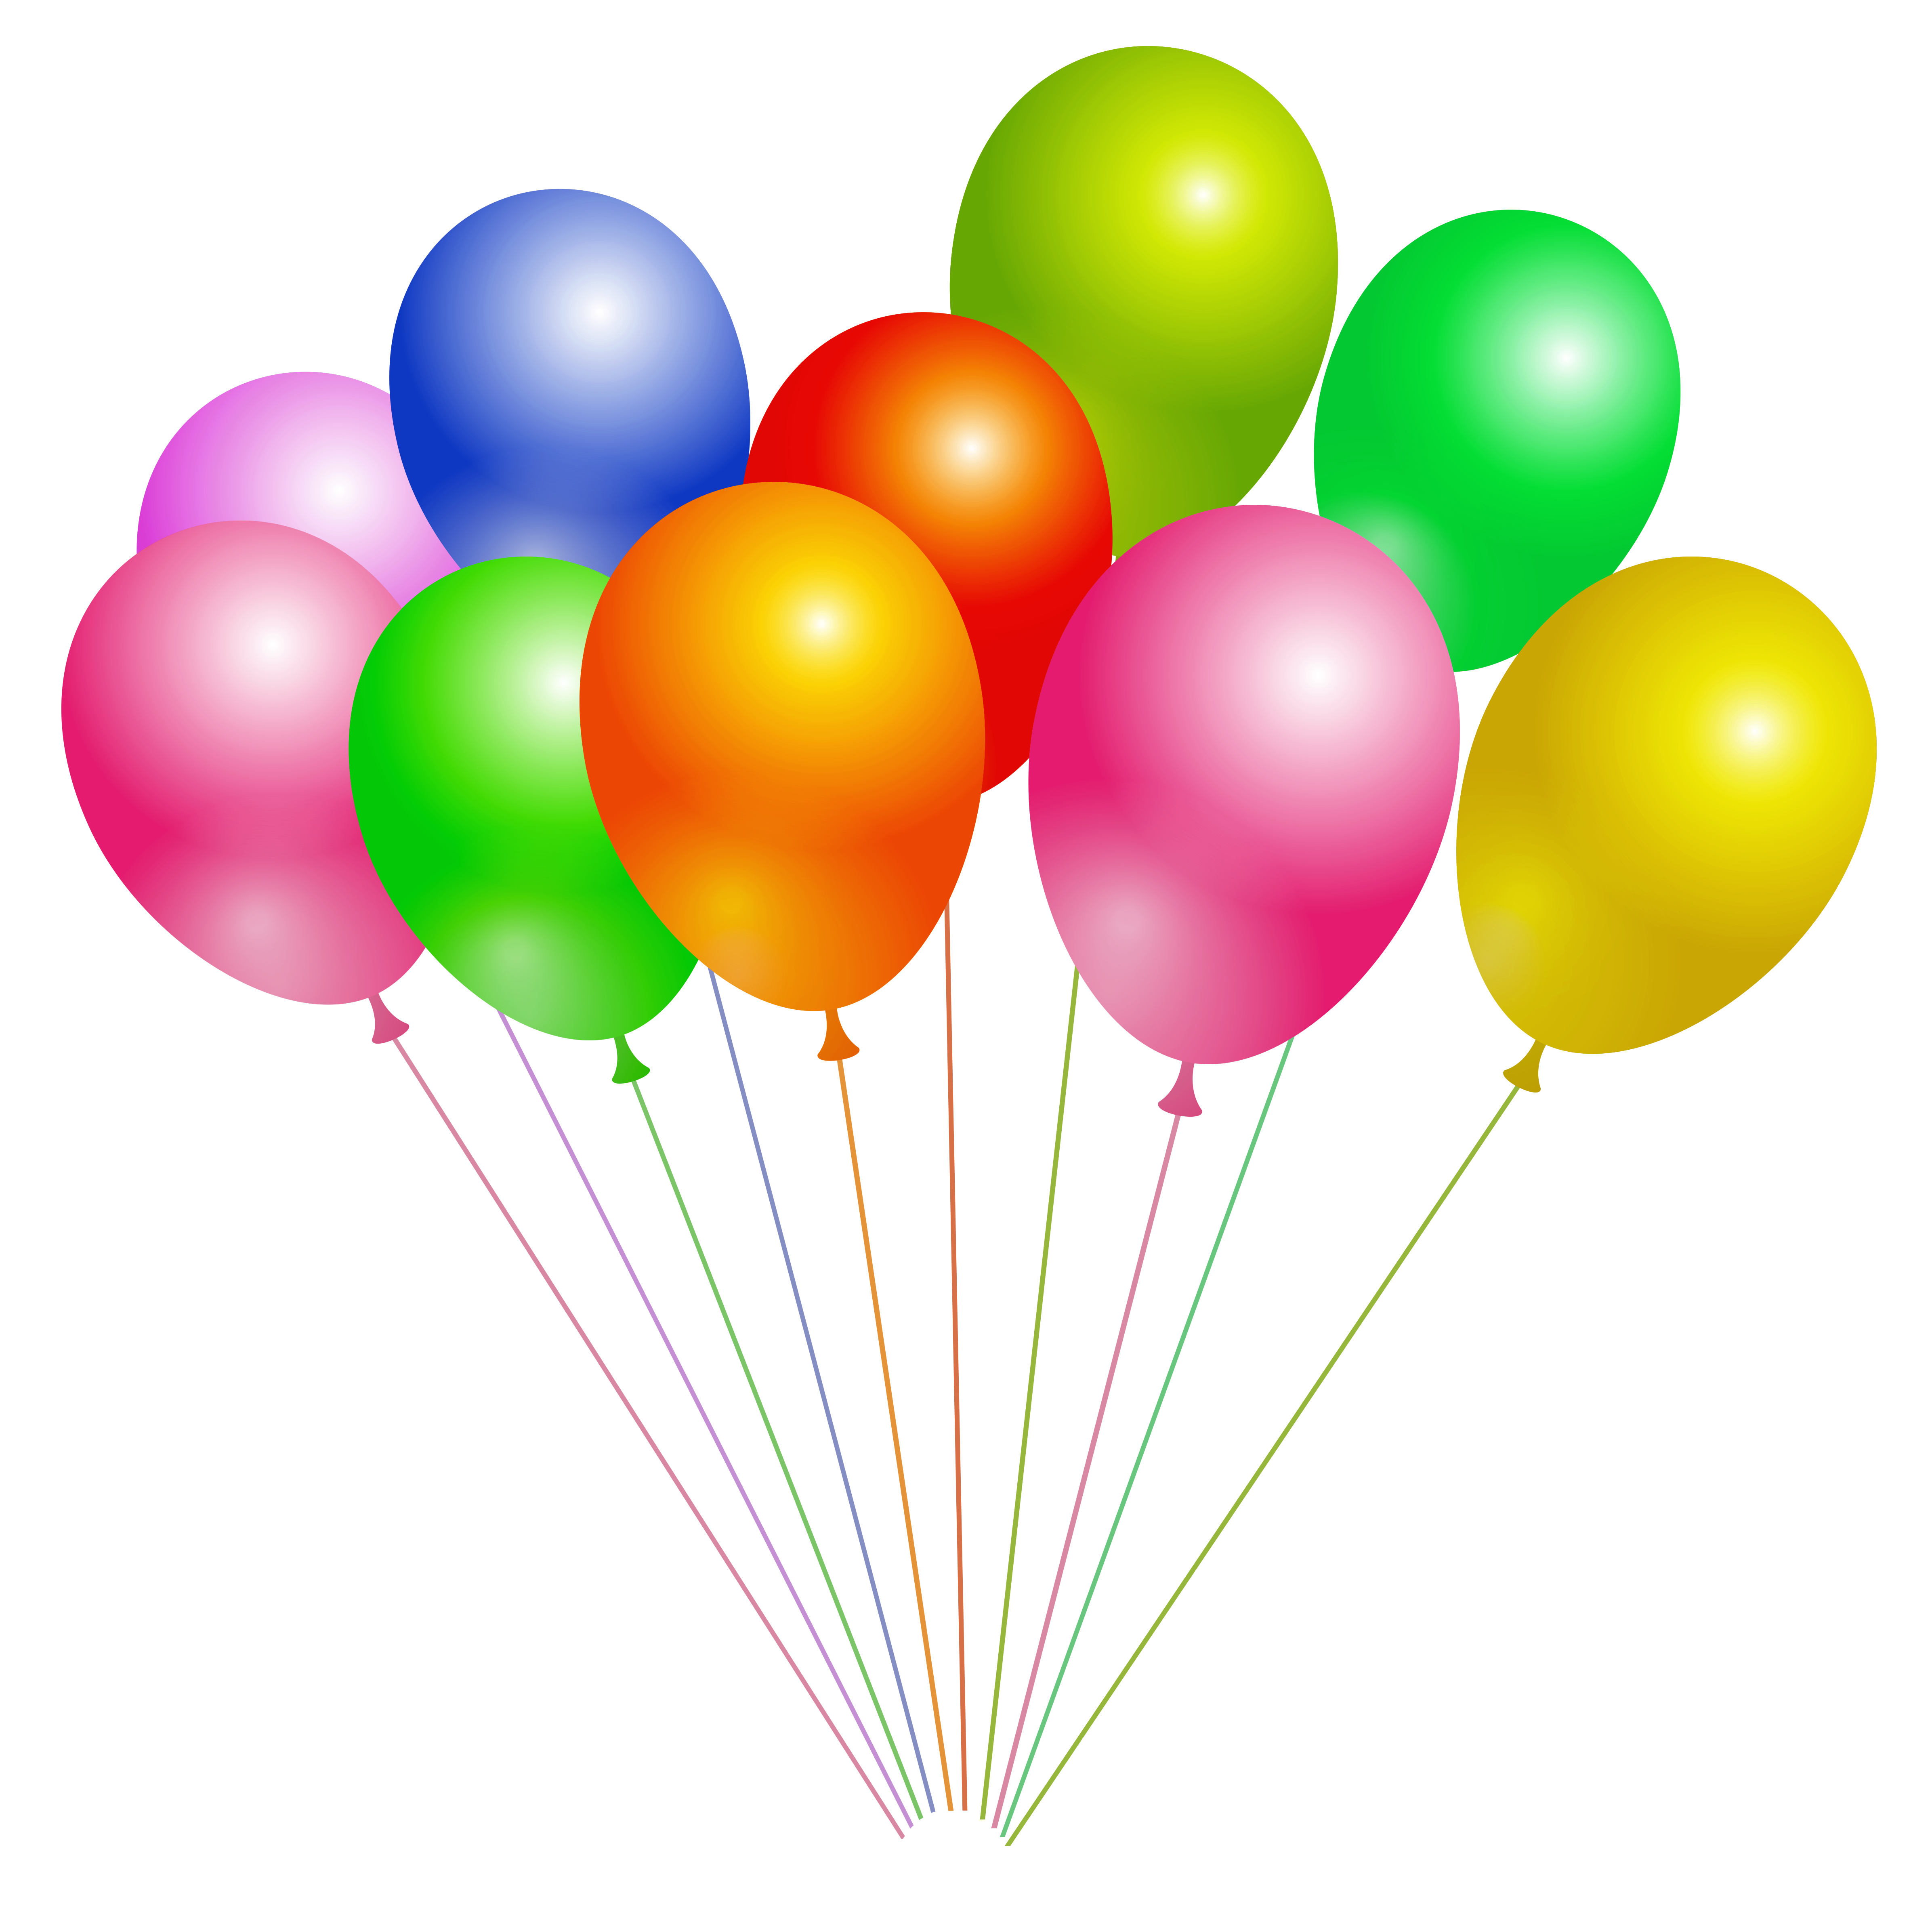 Transparent Baloons PNG Picture | Gallery Yopriceville - High-Quality